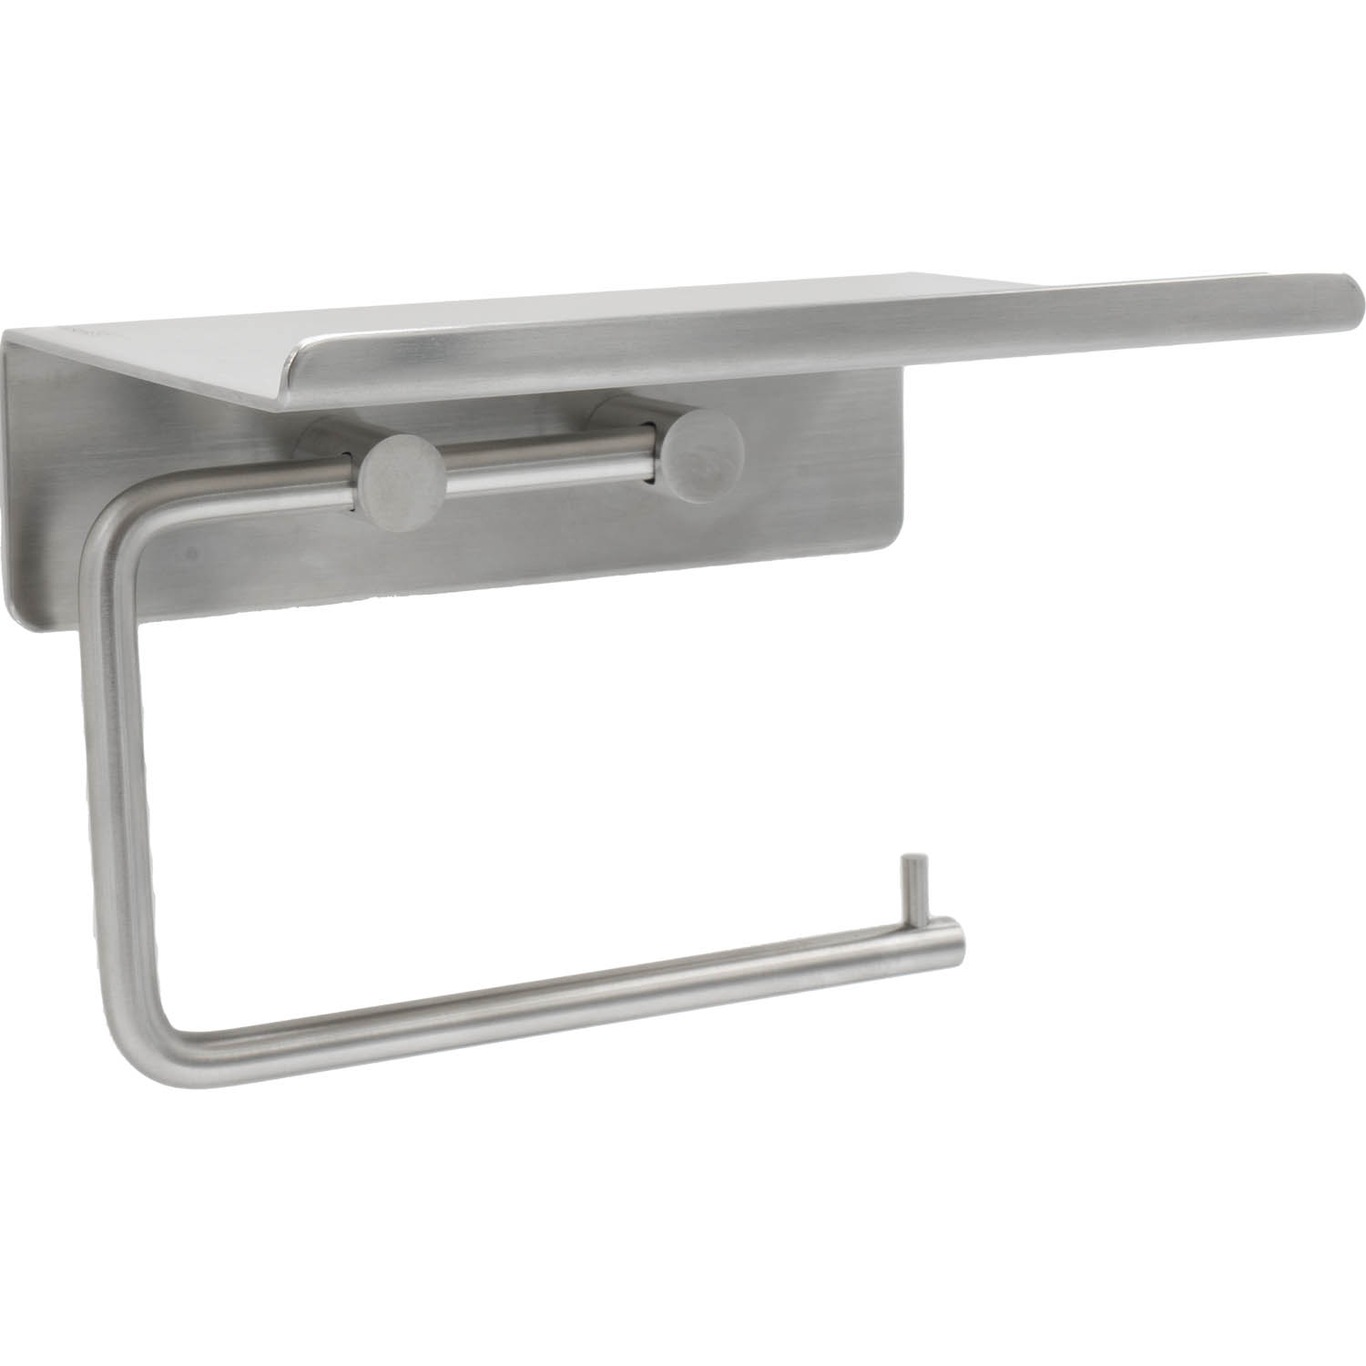 Base Toilet Paper Holder With Shelf, Stainless Steel